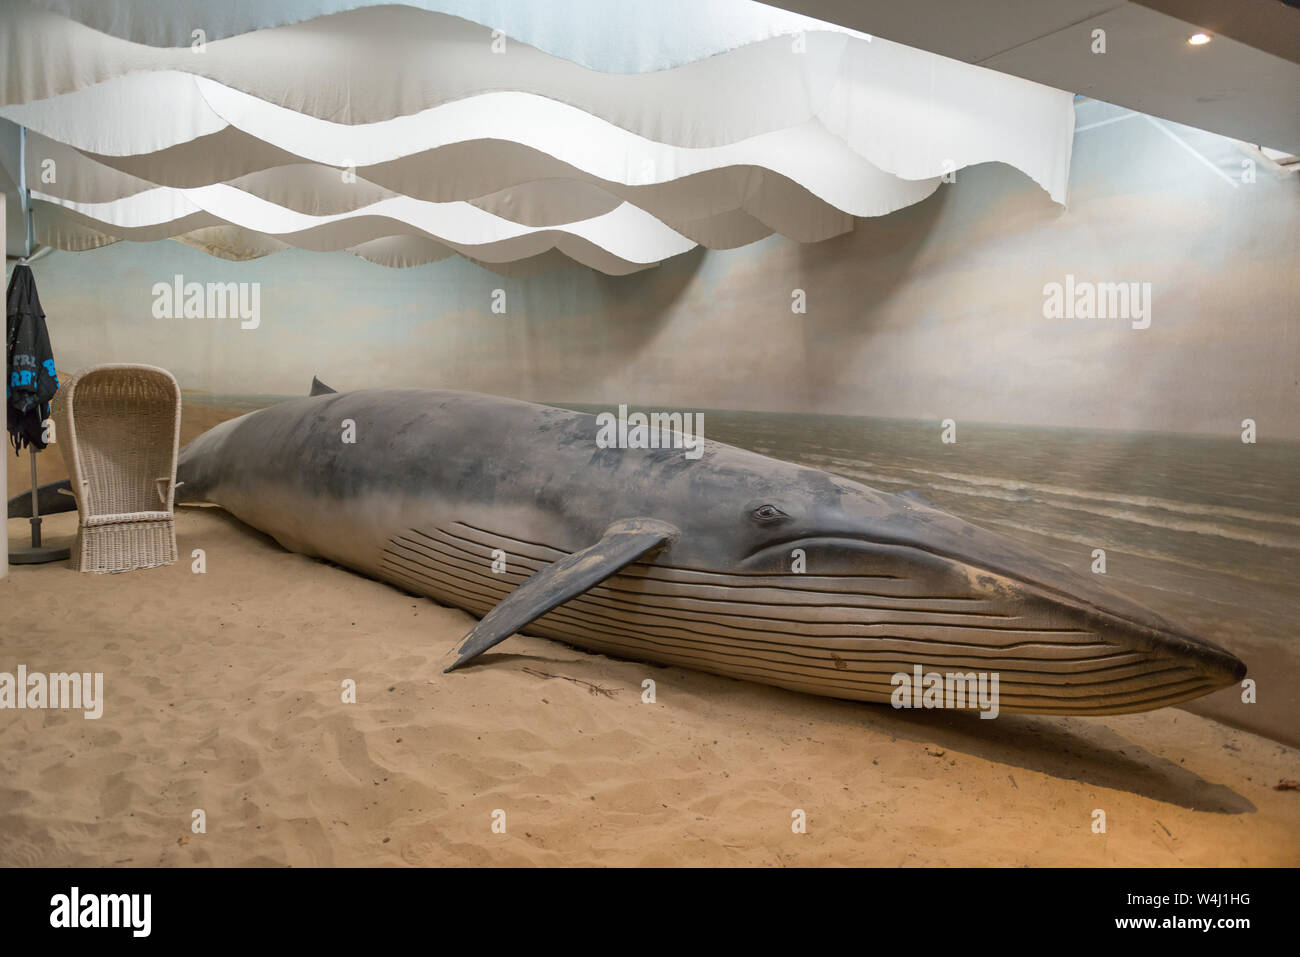 Artwork of a stranded whale in the Royal Burgers' Zoo in Arnhem, The Netherlands Stock Photo